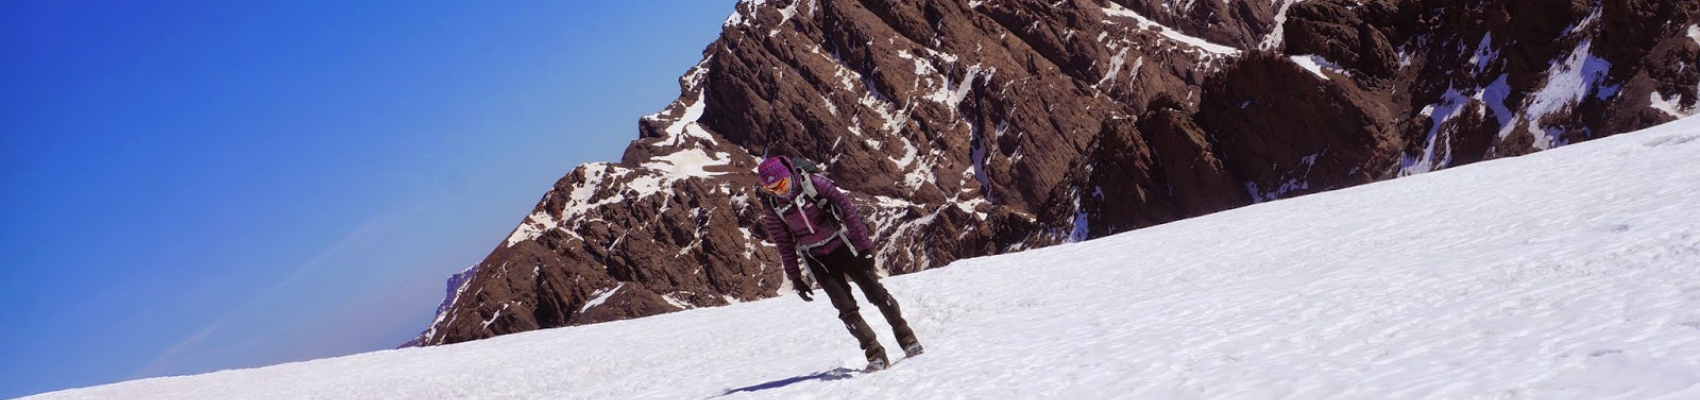 8 Days ski tour in the high atlas moutains of morocco